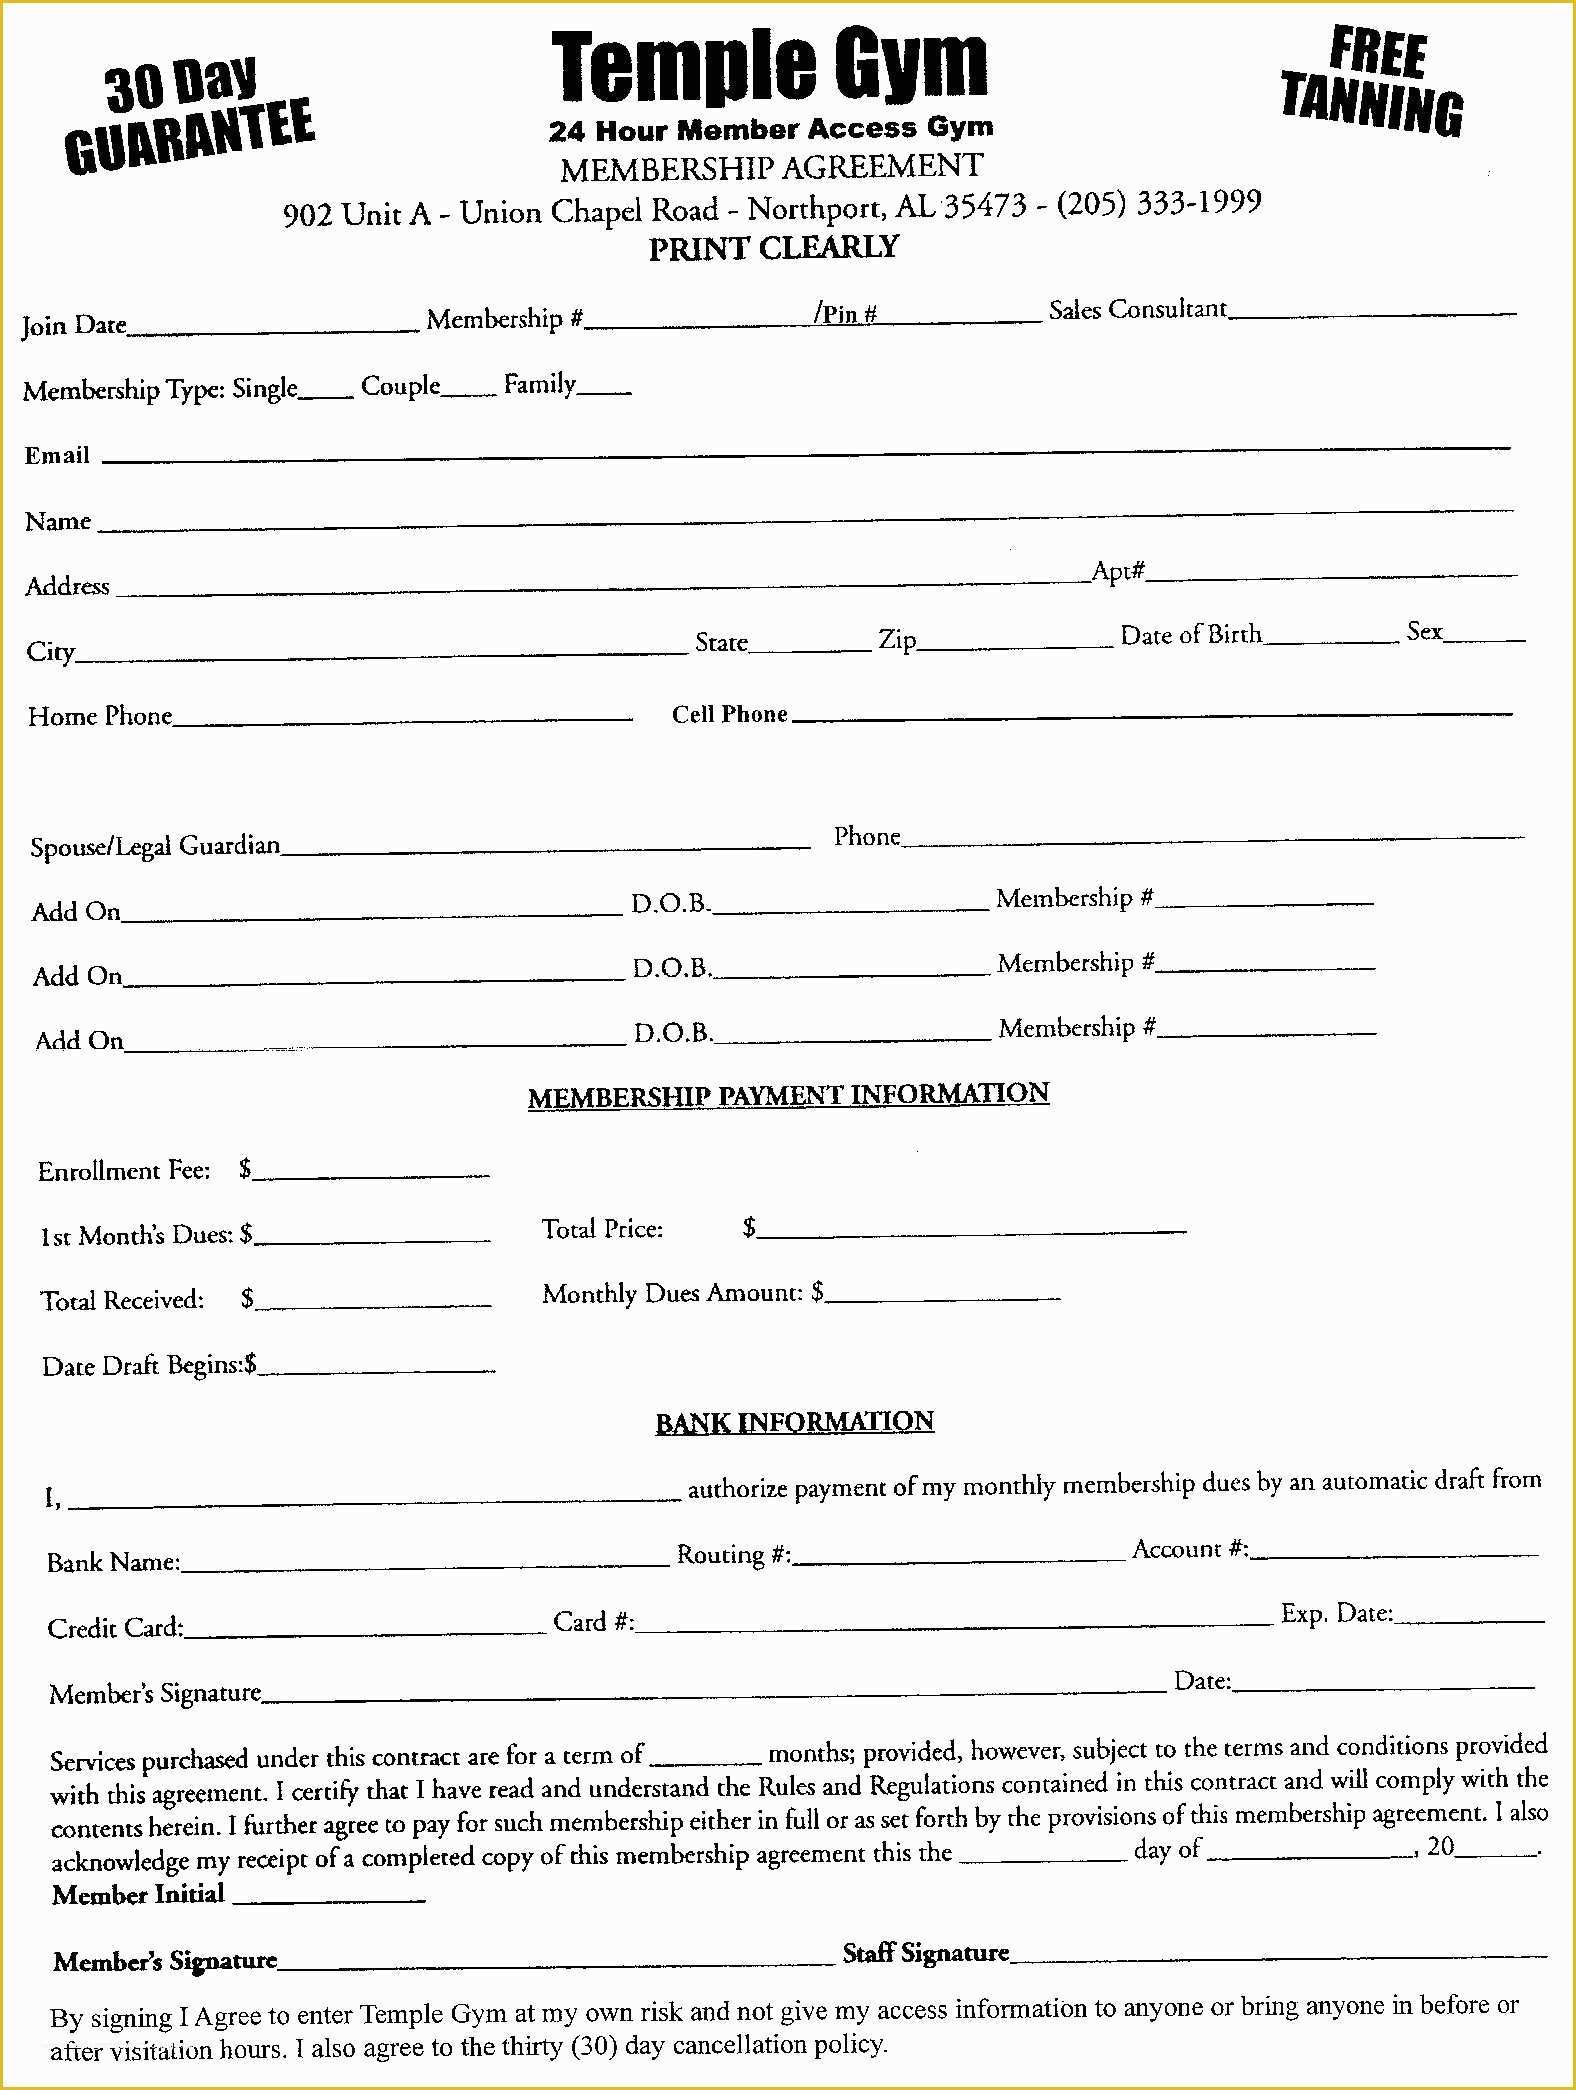 Membership Registration form Templates Free Of Free Fitness Center Legal Membership Waiver forms for Gyms